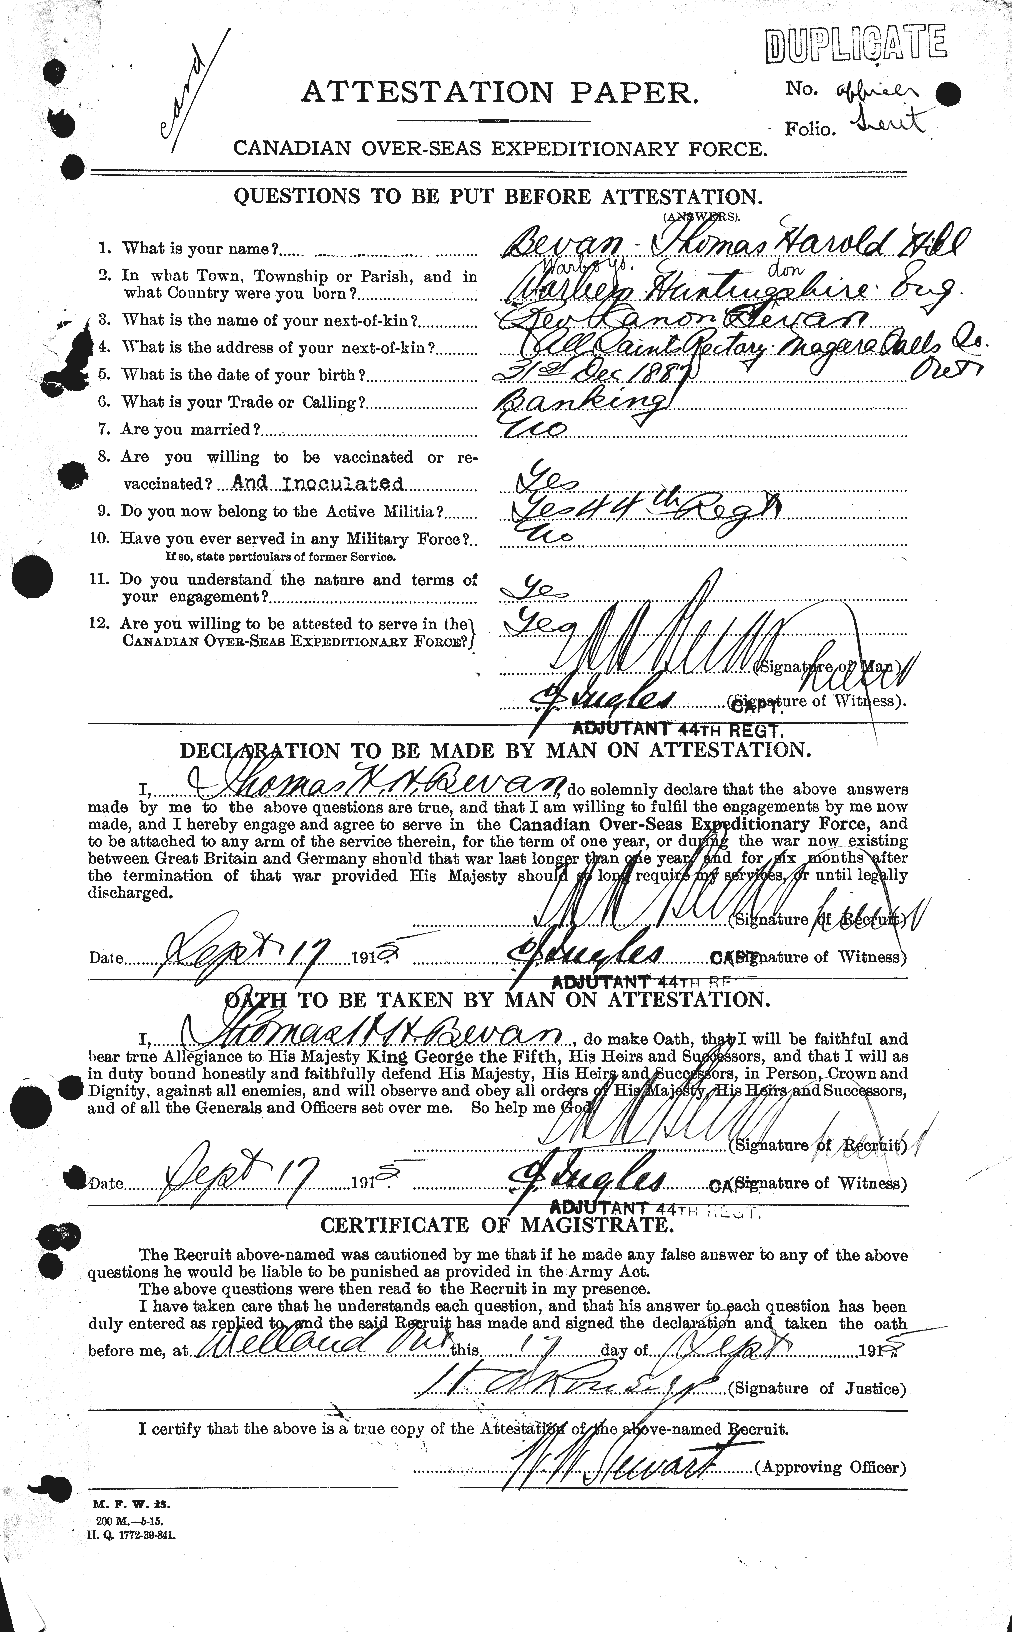 Personnel Records of the First World War - CEF 237278a